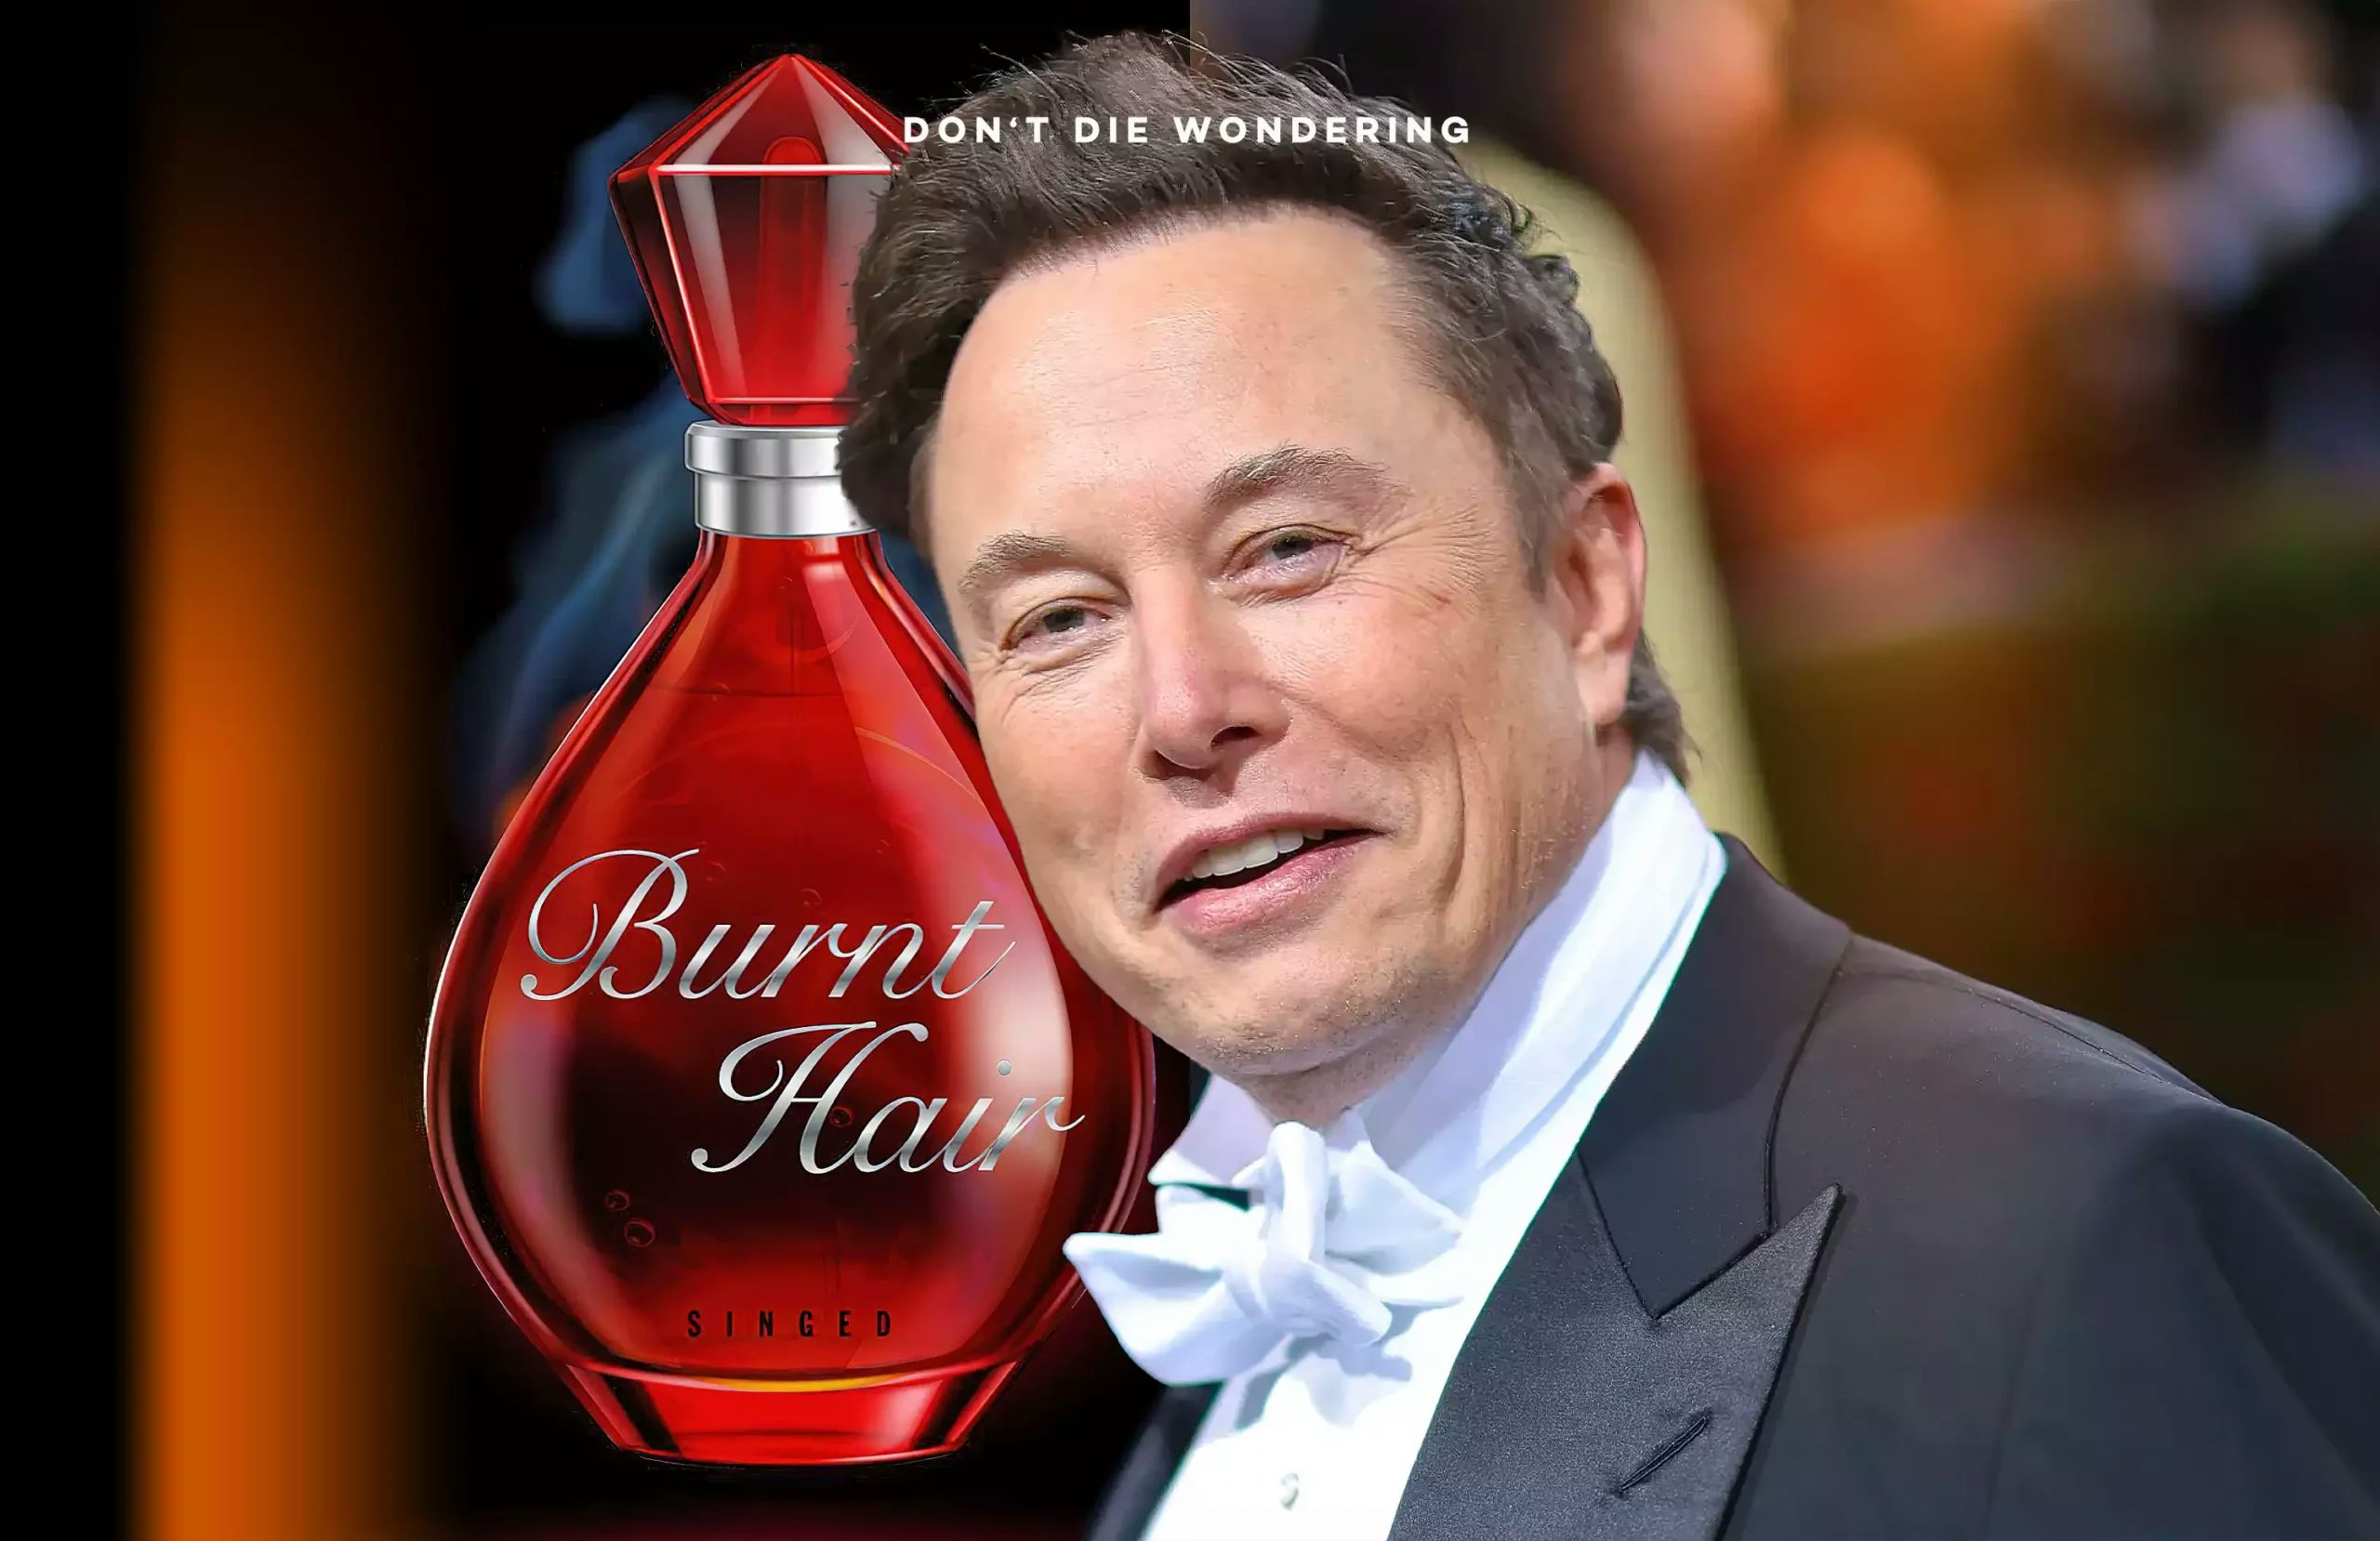 Elon Musk Sells-out his Own “Musk”